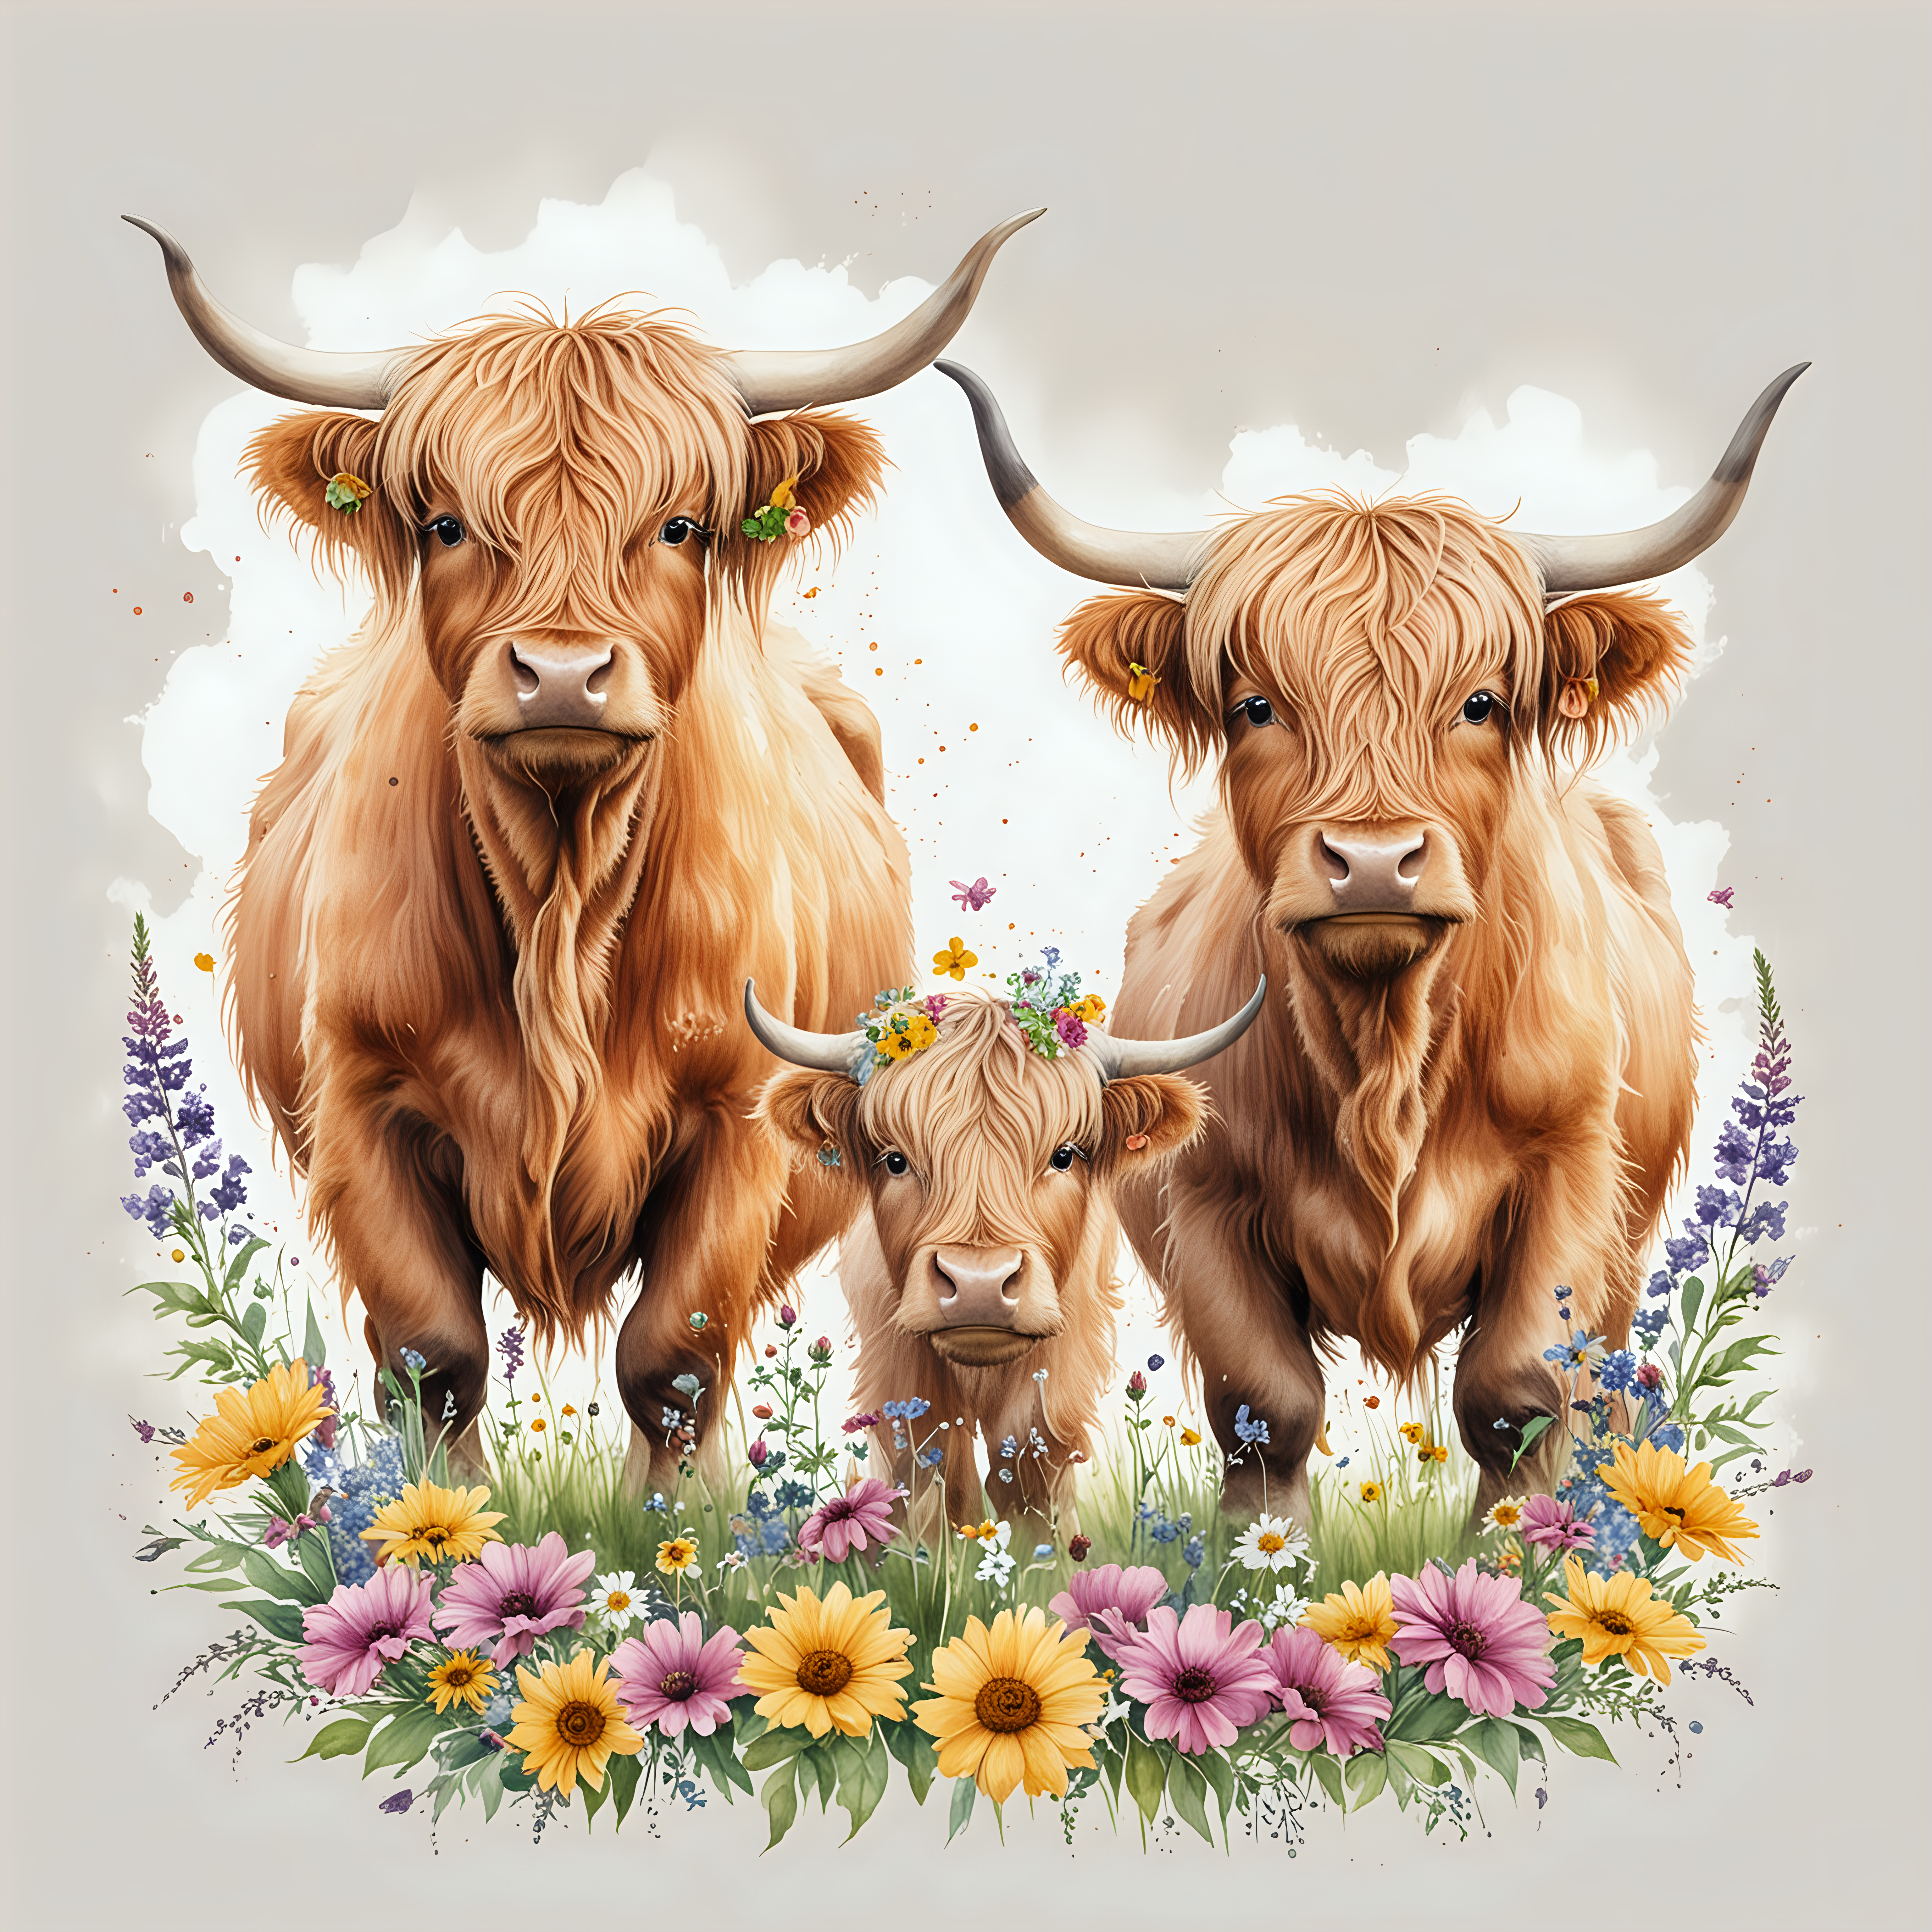 Highland Cow Watercolor Drawing with Flowers Cute Clip Art on White Background